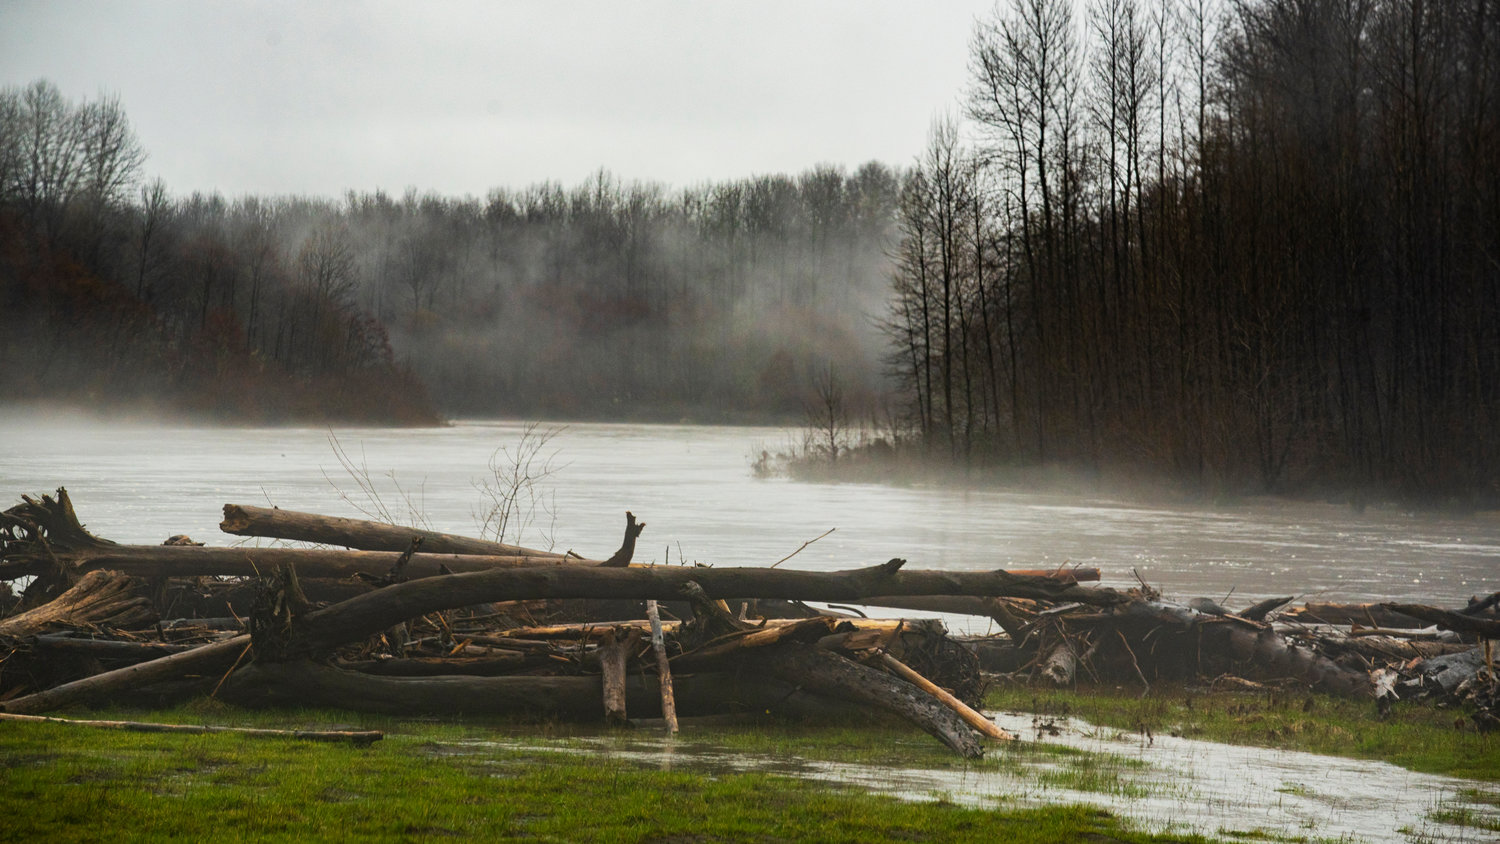 Water flows as fog drifts above debris floating in the Cowlitz River Tuesday near Randle.